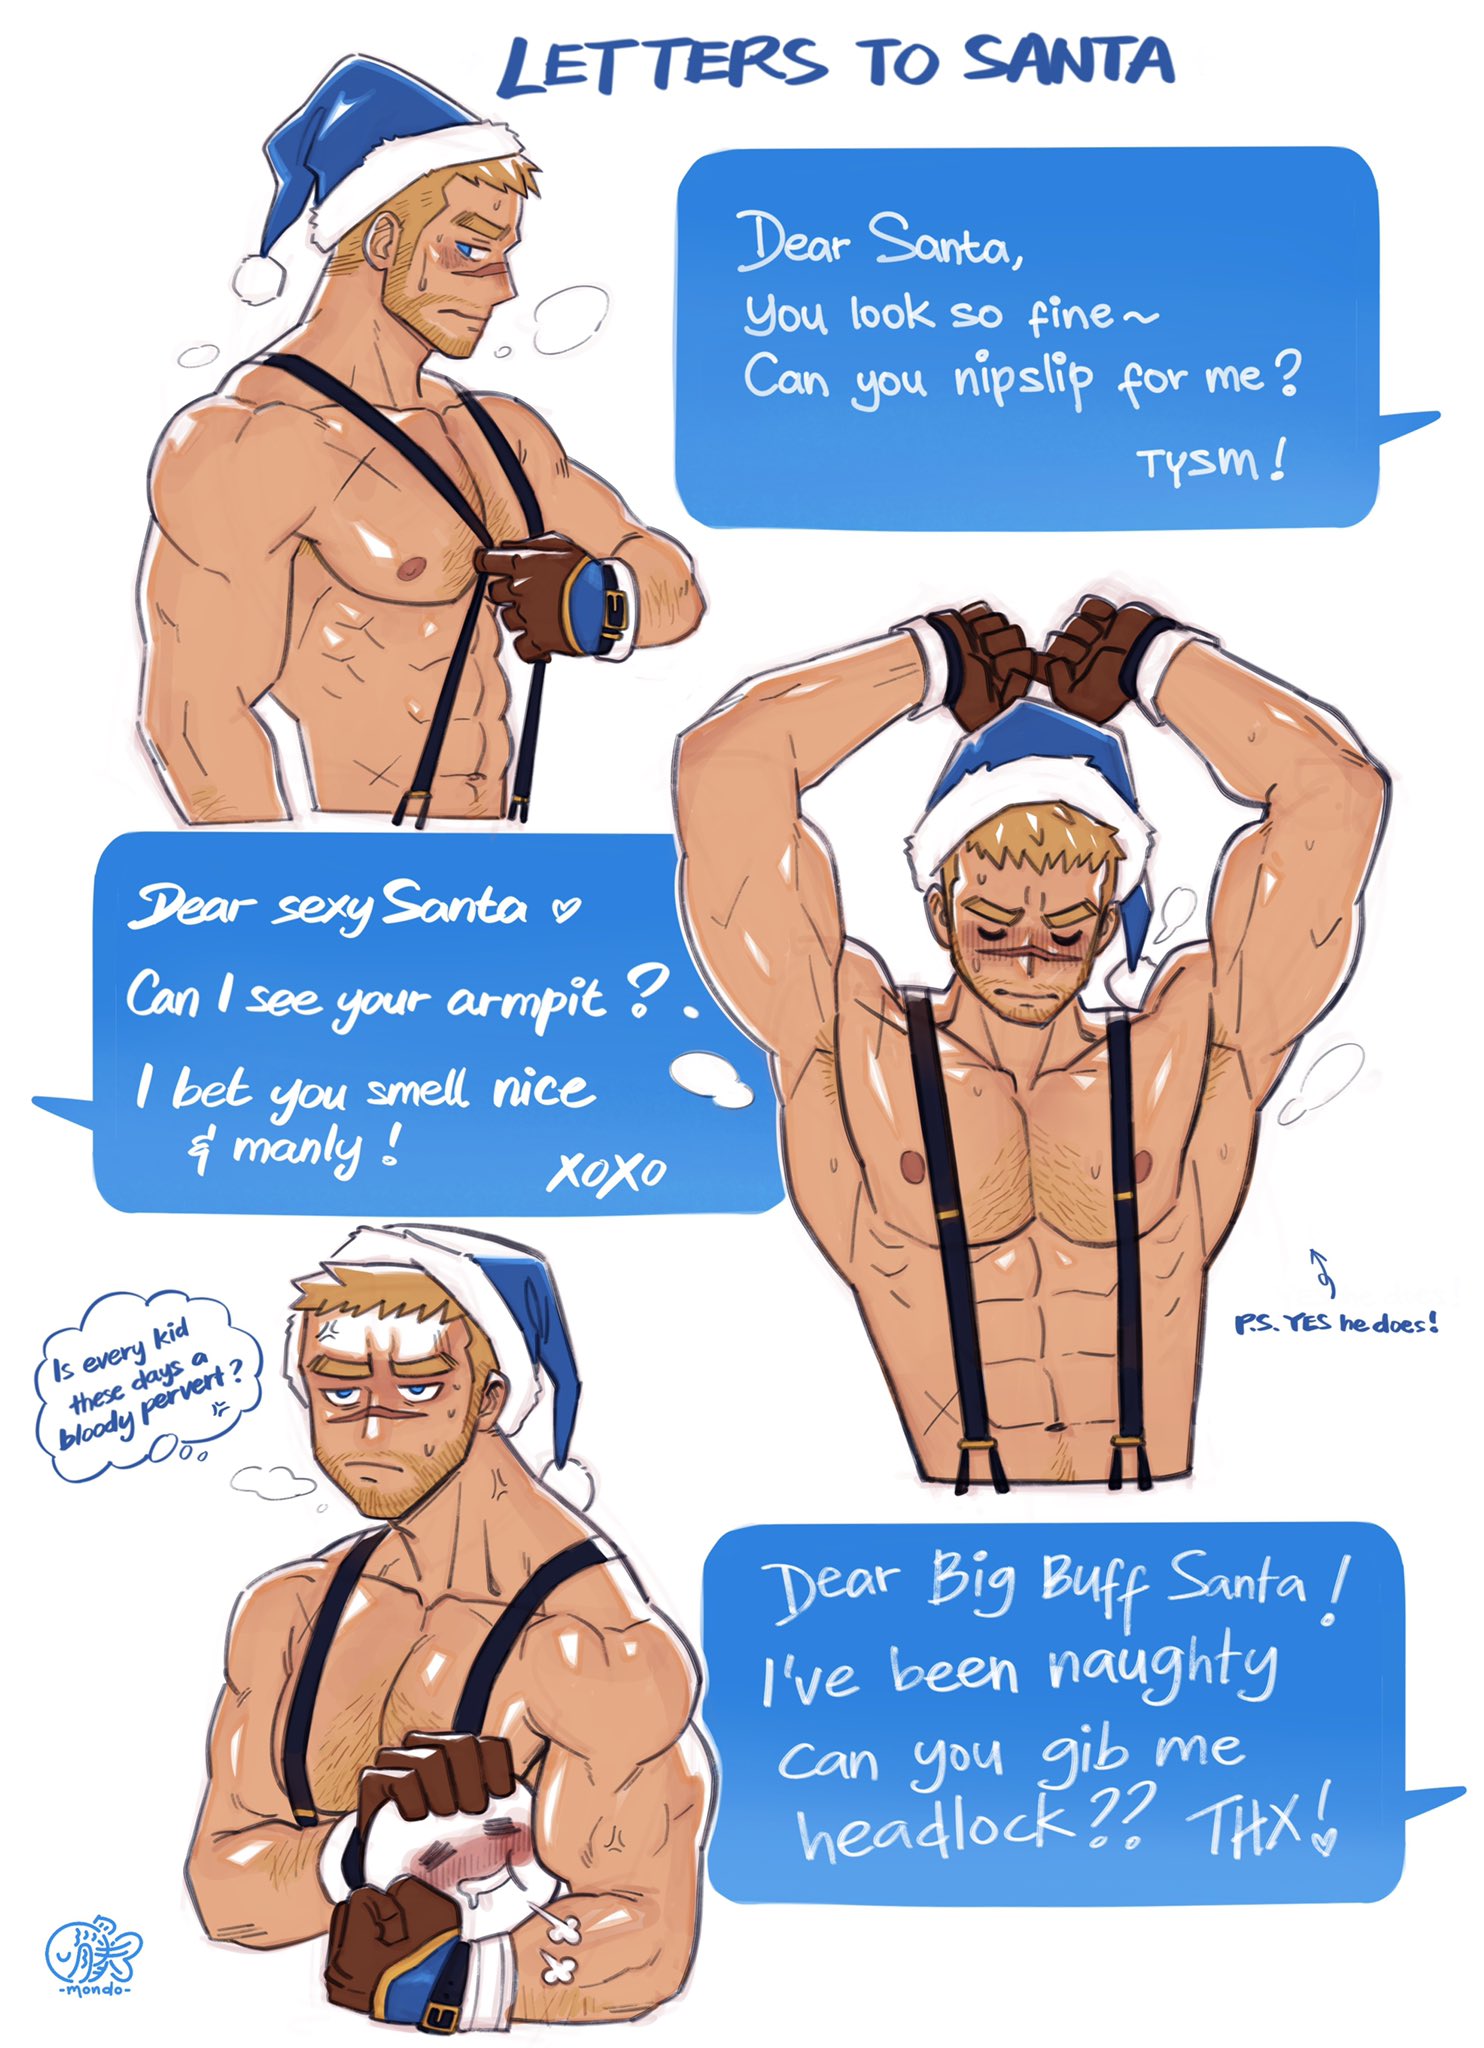 MondoArt on X: "Have you wrote to sexy daddy blue Santa? 💪😉🎄 I think it whether you're naughty or nice in this case …the 2nd probably from me